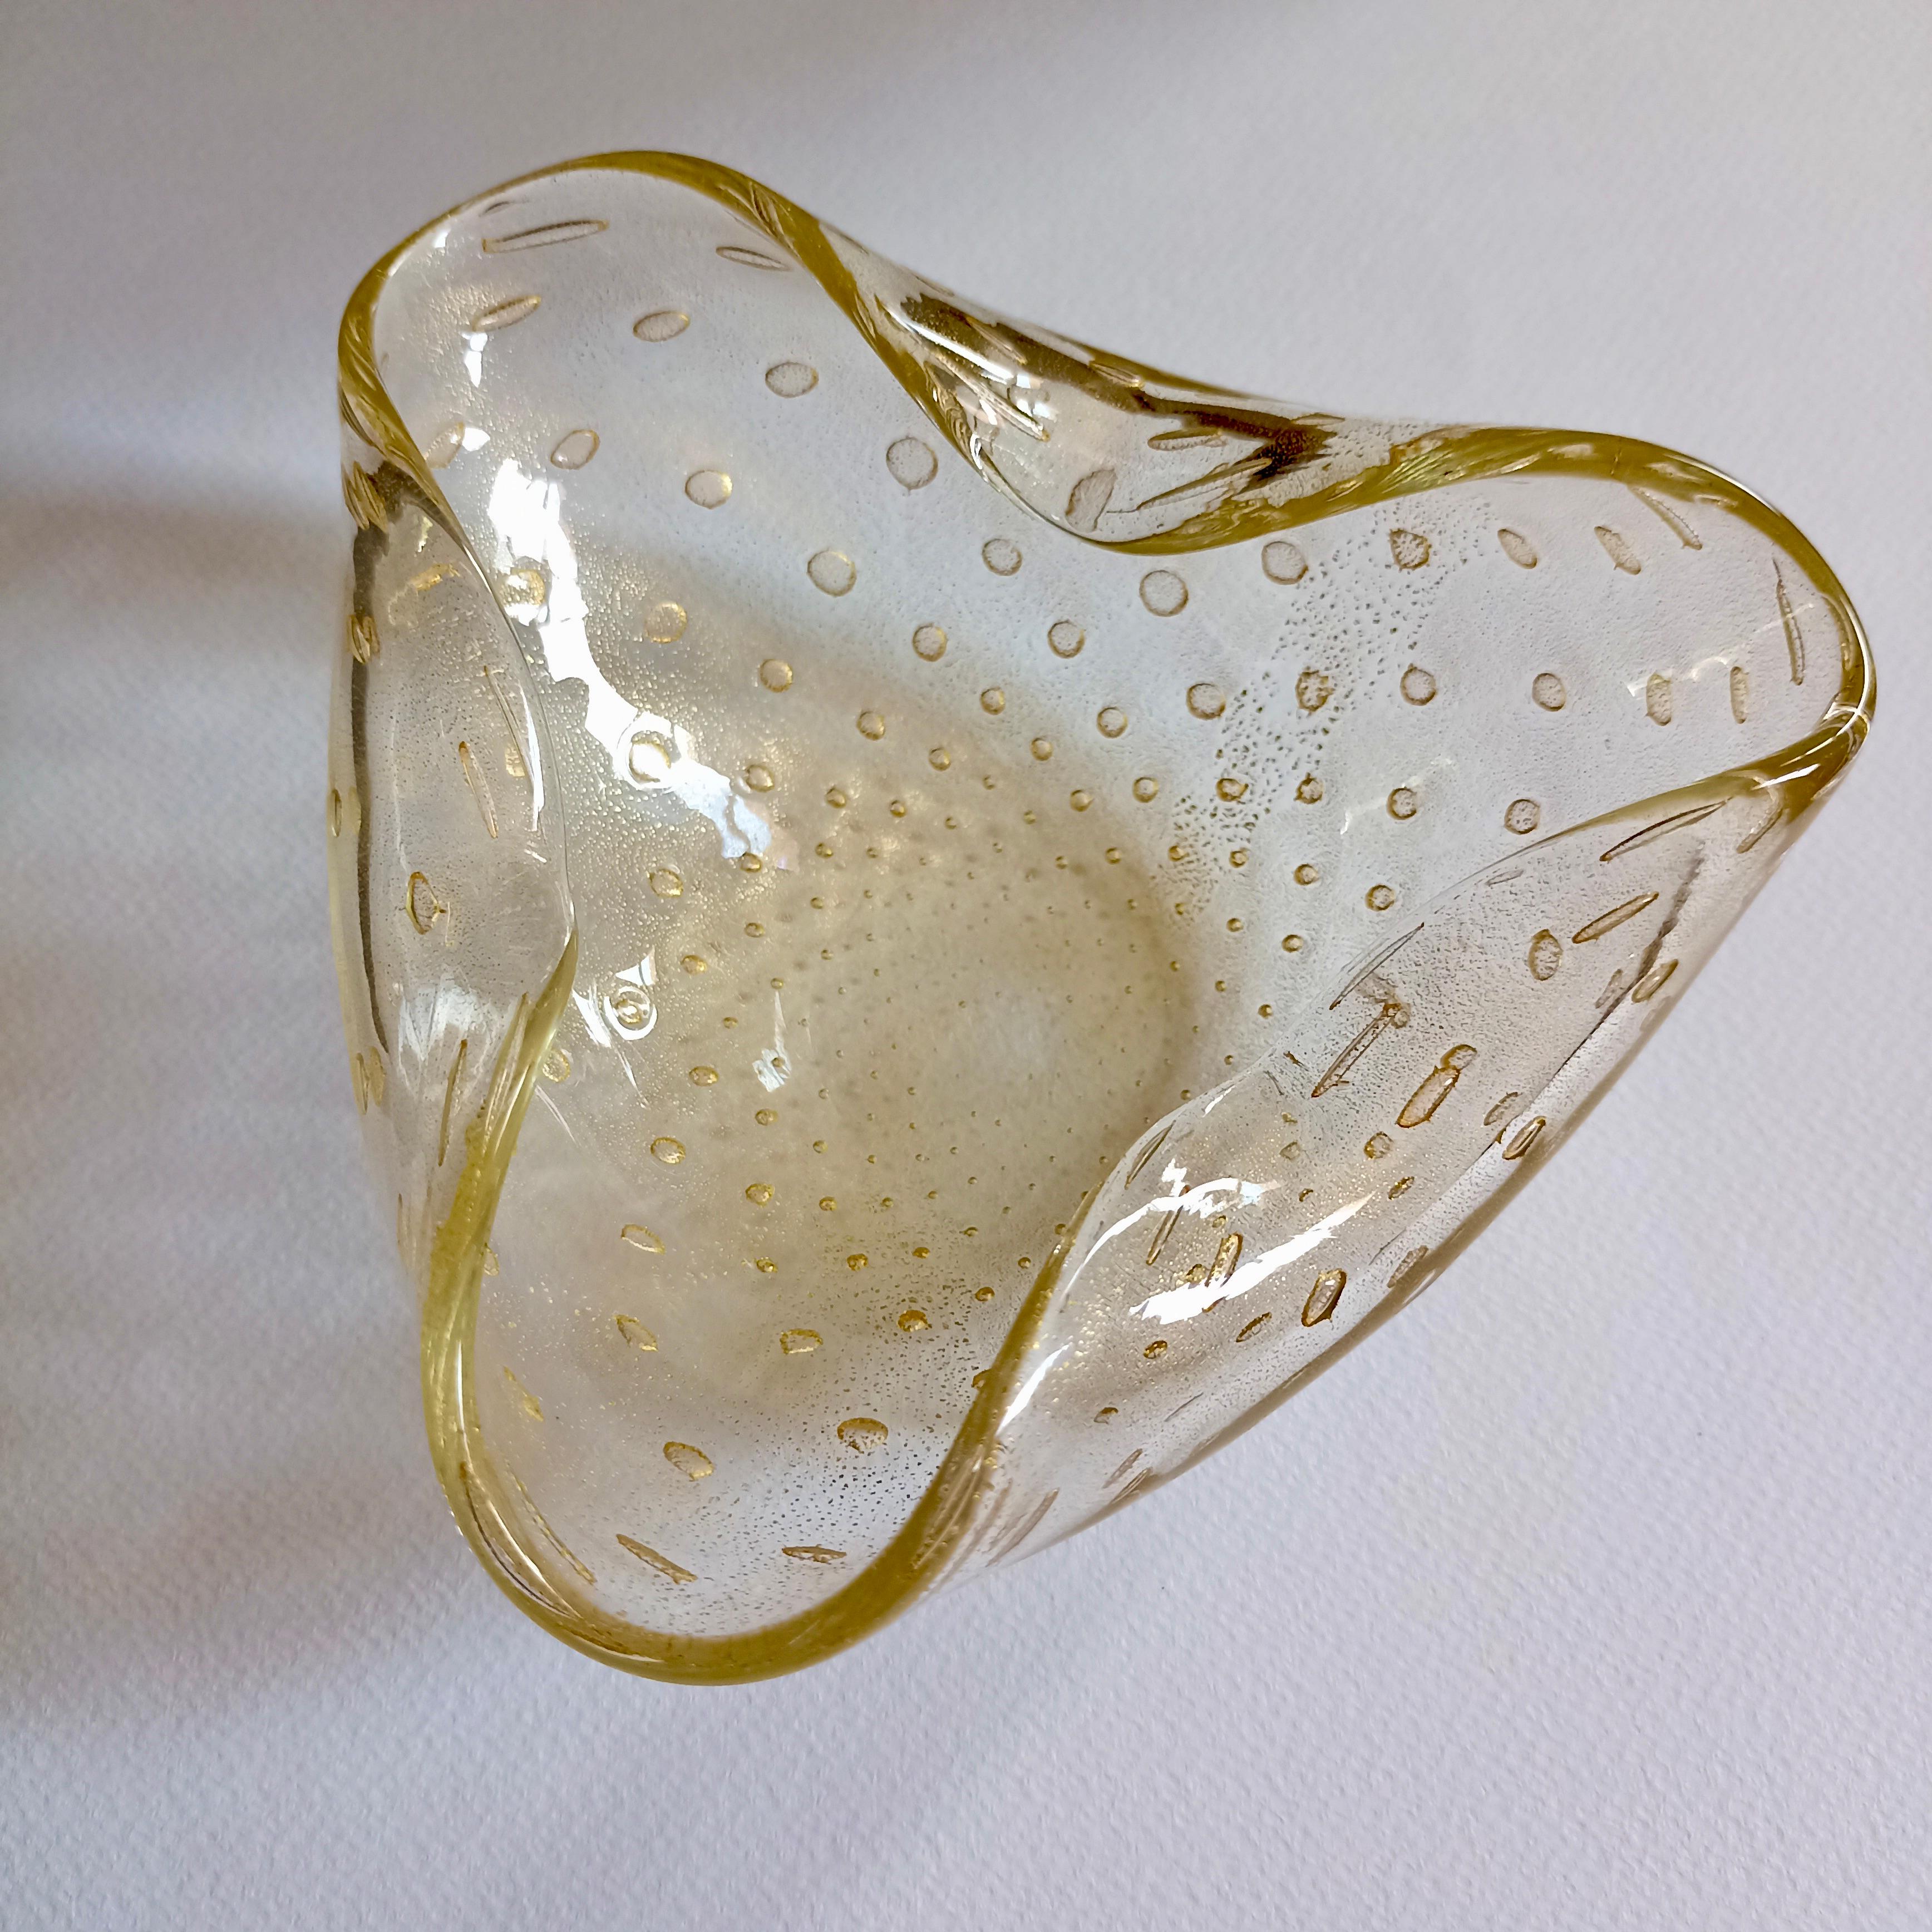 Beautiful 1990s Italian ashtray/pocket emptier with beautiful Bulicante bubble work and gold powder inclusion. Hand-marked at the base Serenella Art Murano.
A vintage ashtray is always a must for quality, durability and design.
This beautiful